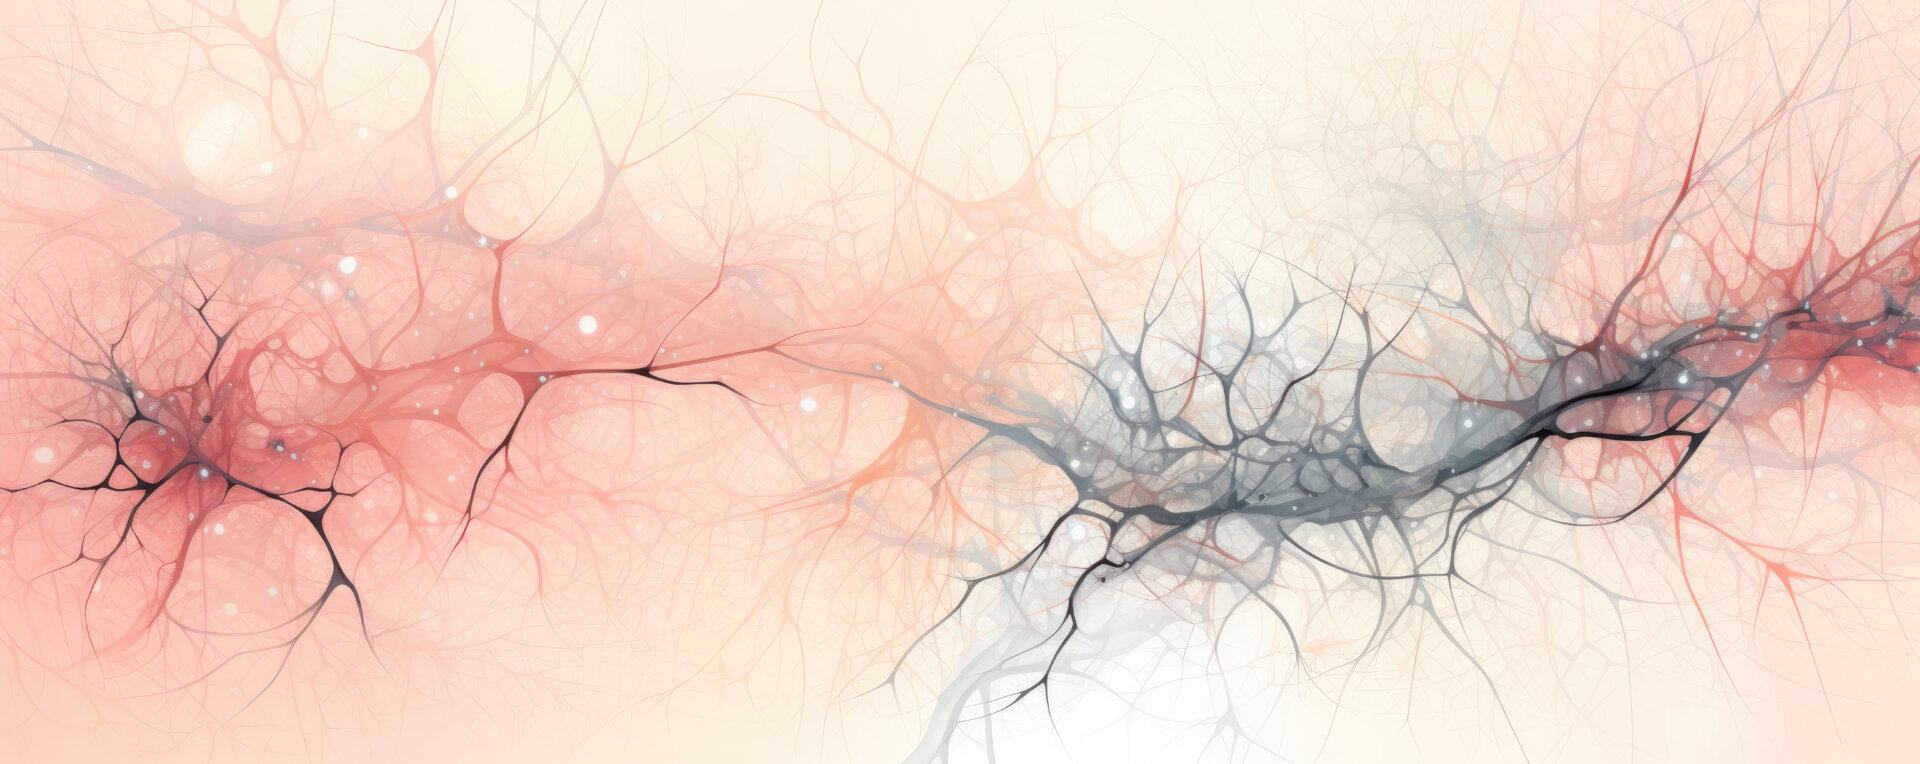 Wide panoramic view of minimalist stylised neurons interconnected, presented in soothing pastel pink tones